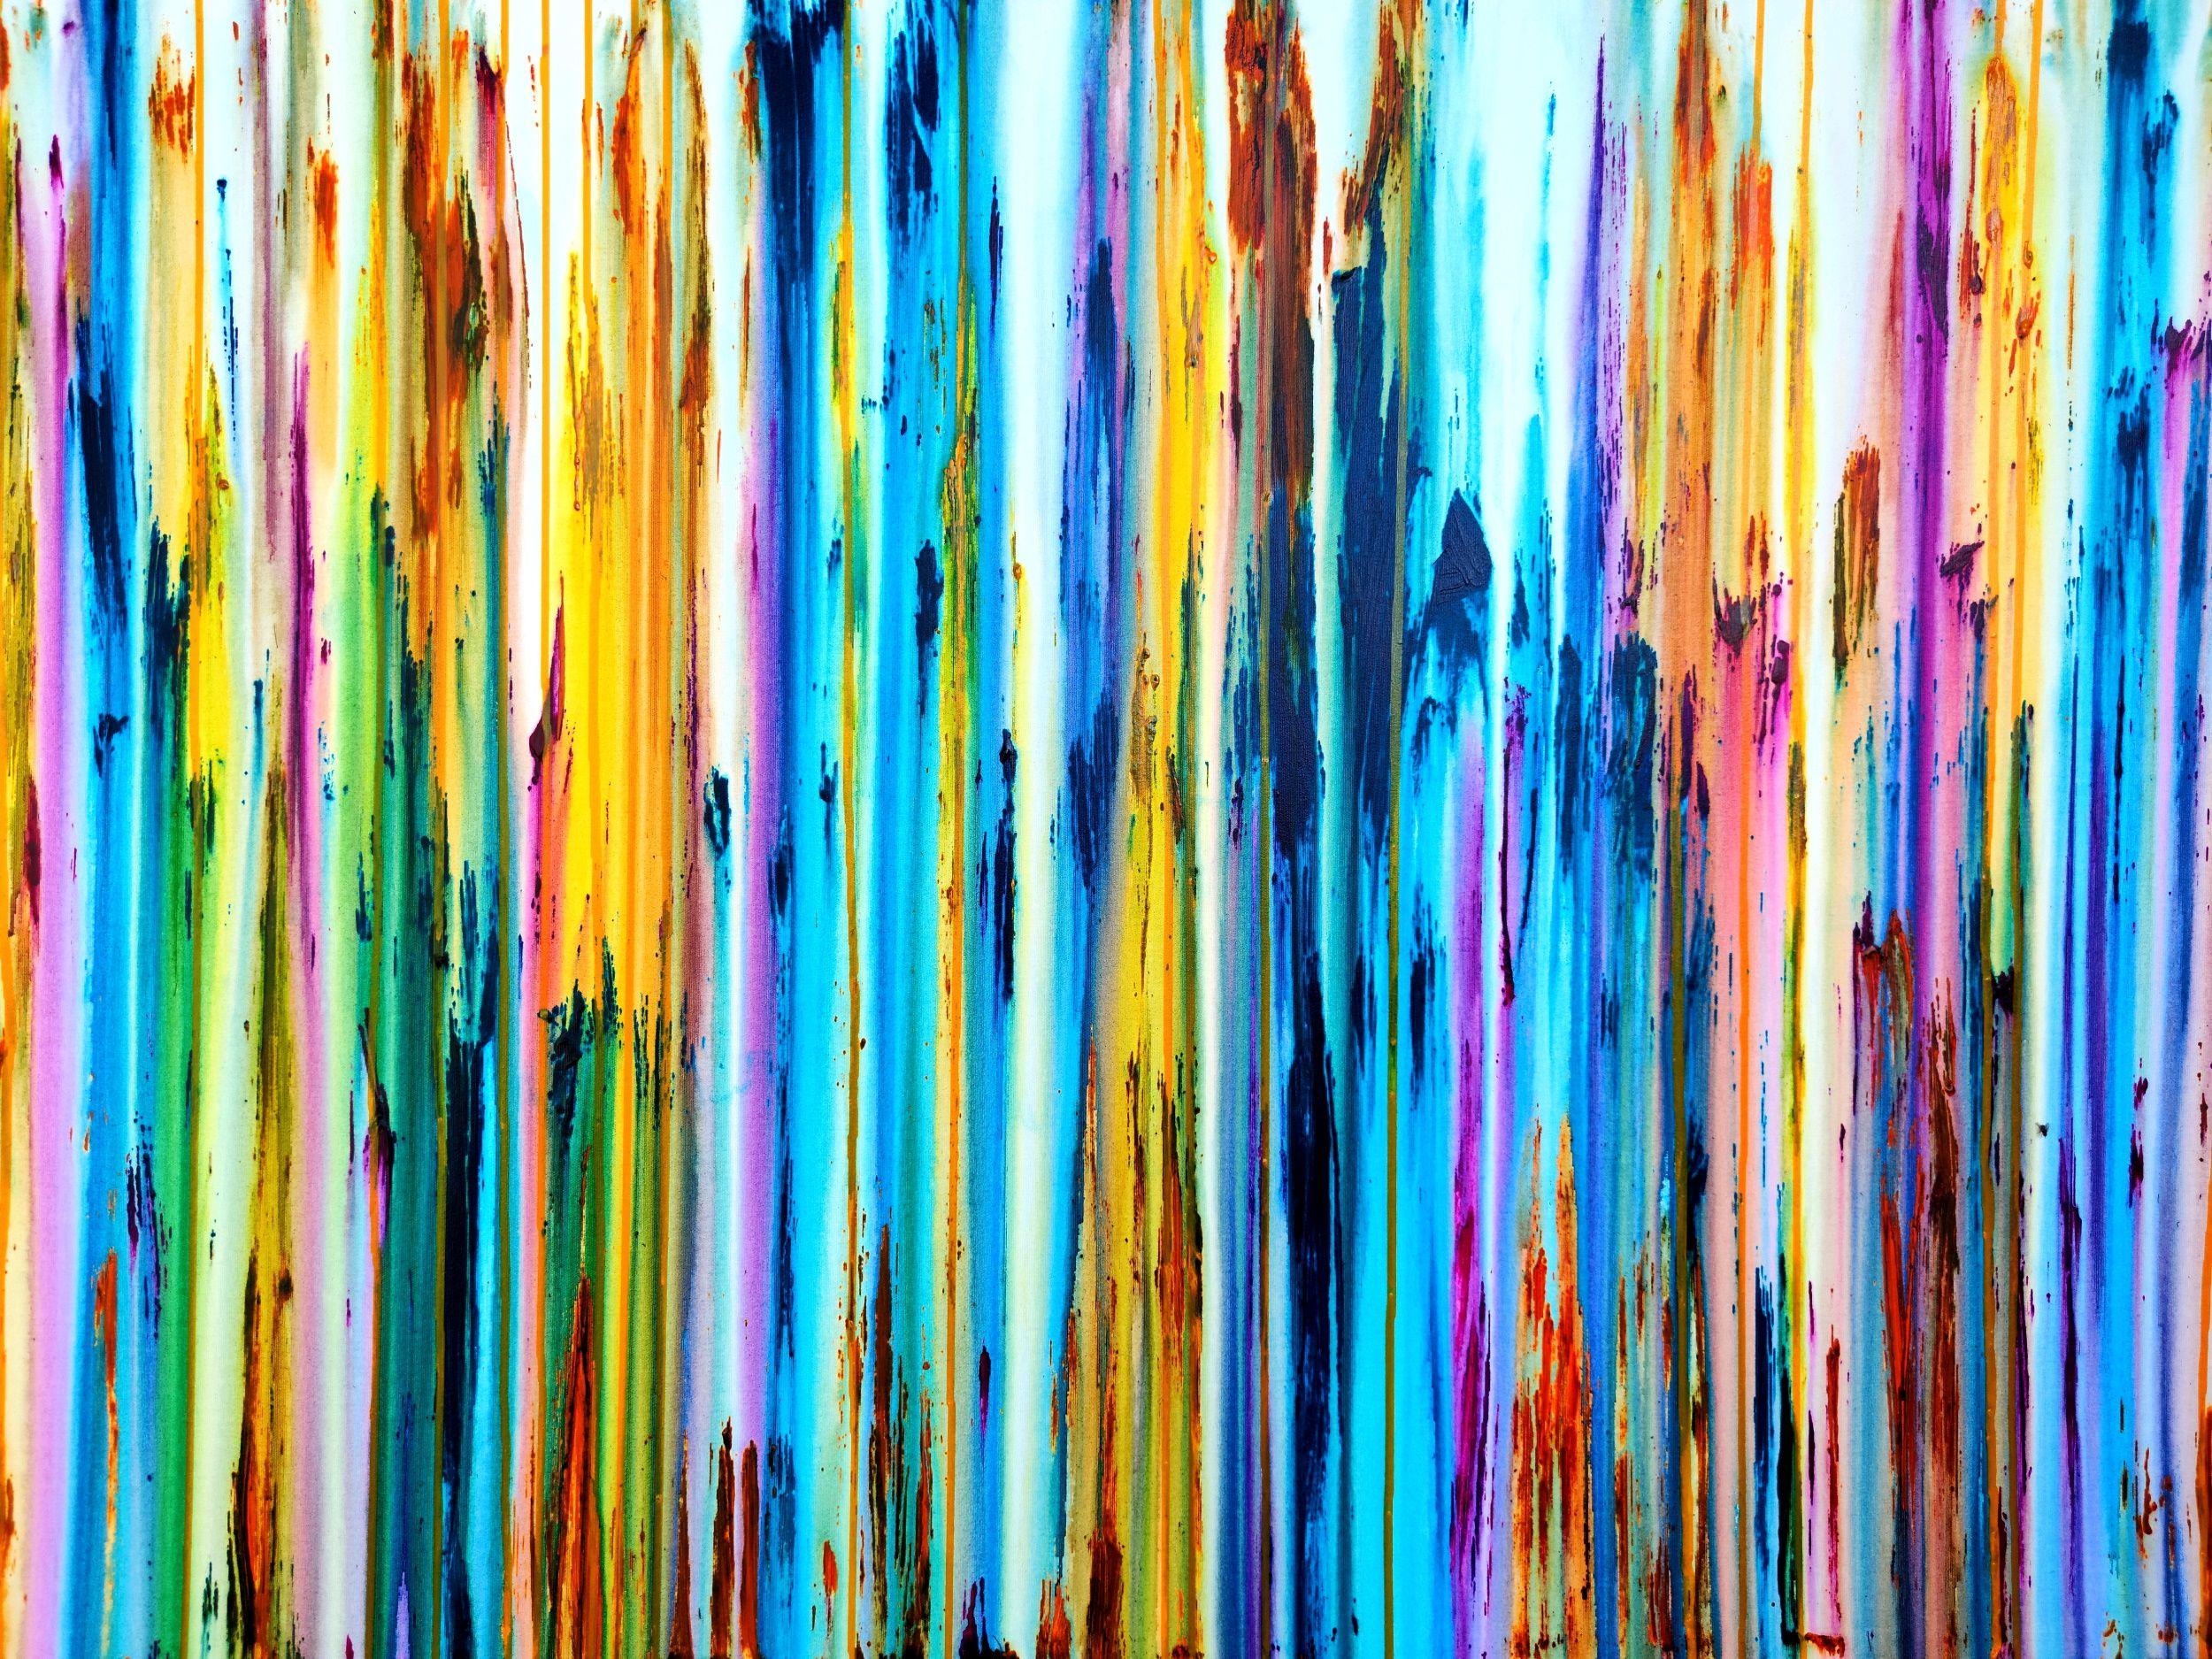 Carla Sá Fernandes Abstract Painting - The Emotional Creation #311, Painting, Acrylic on Canvas